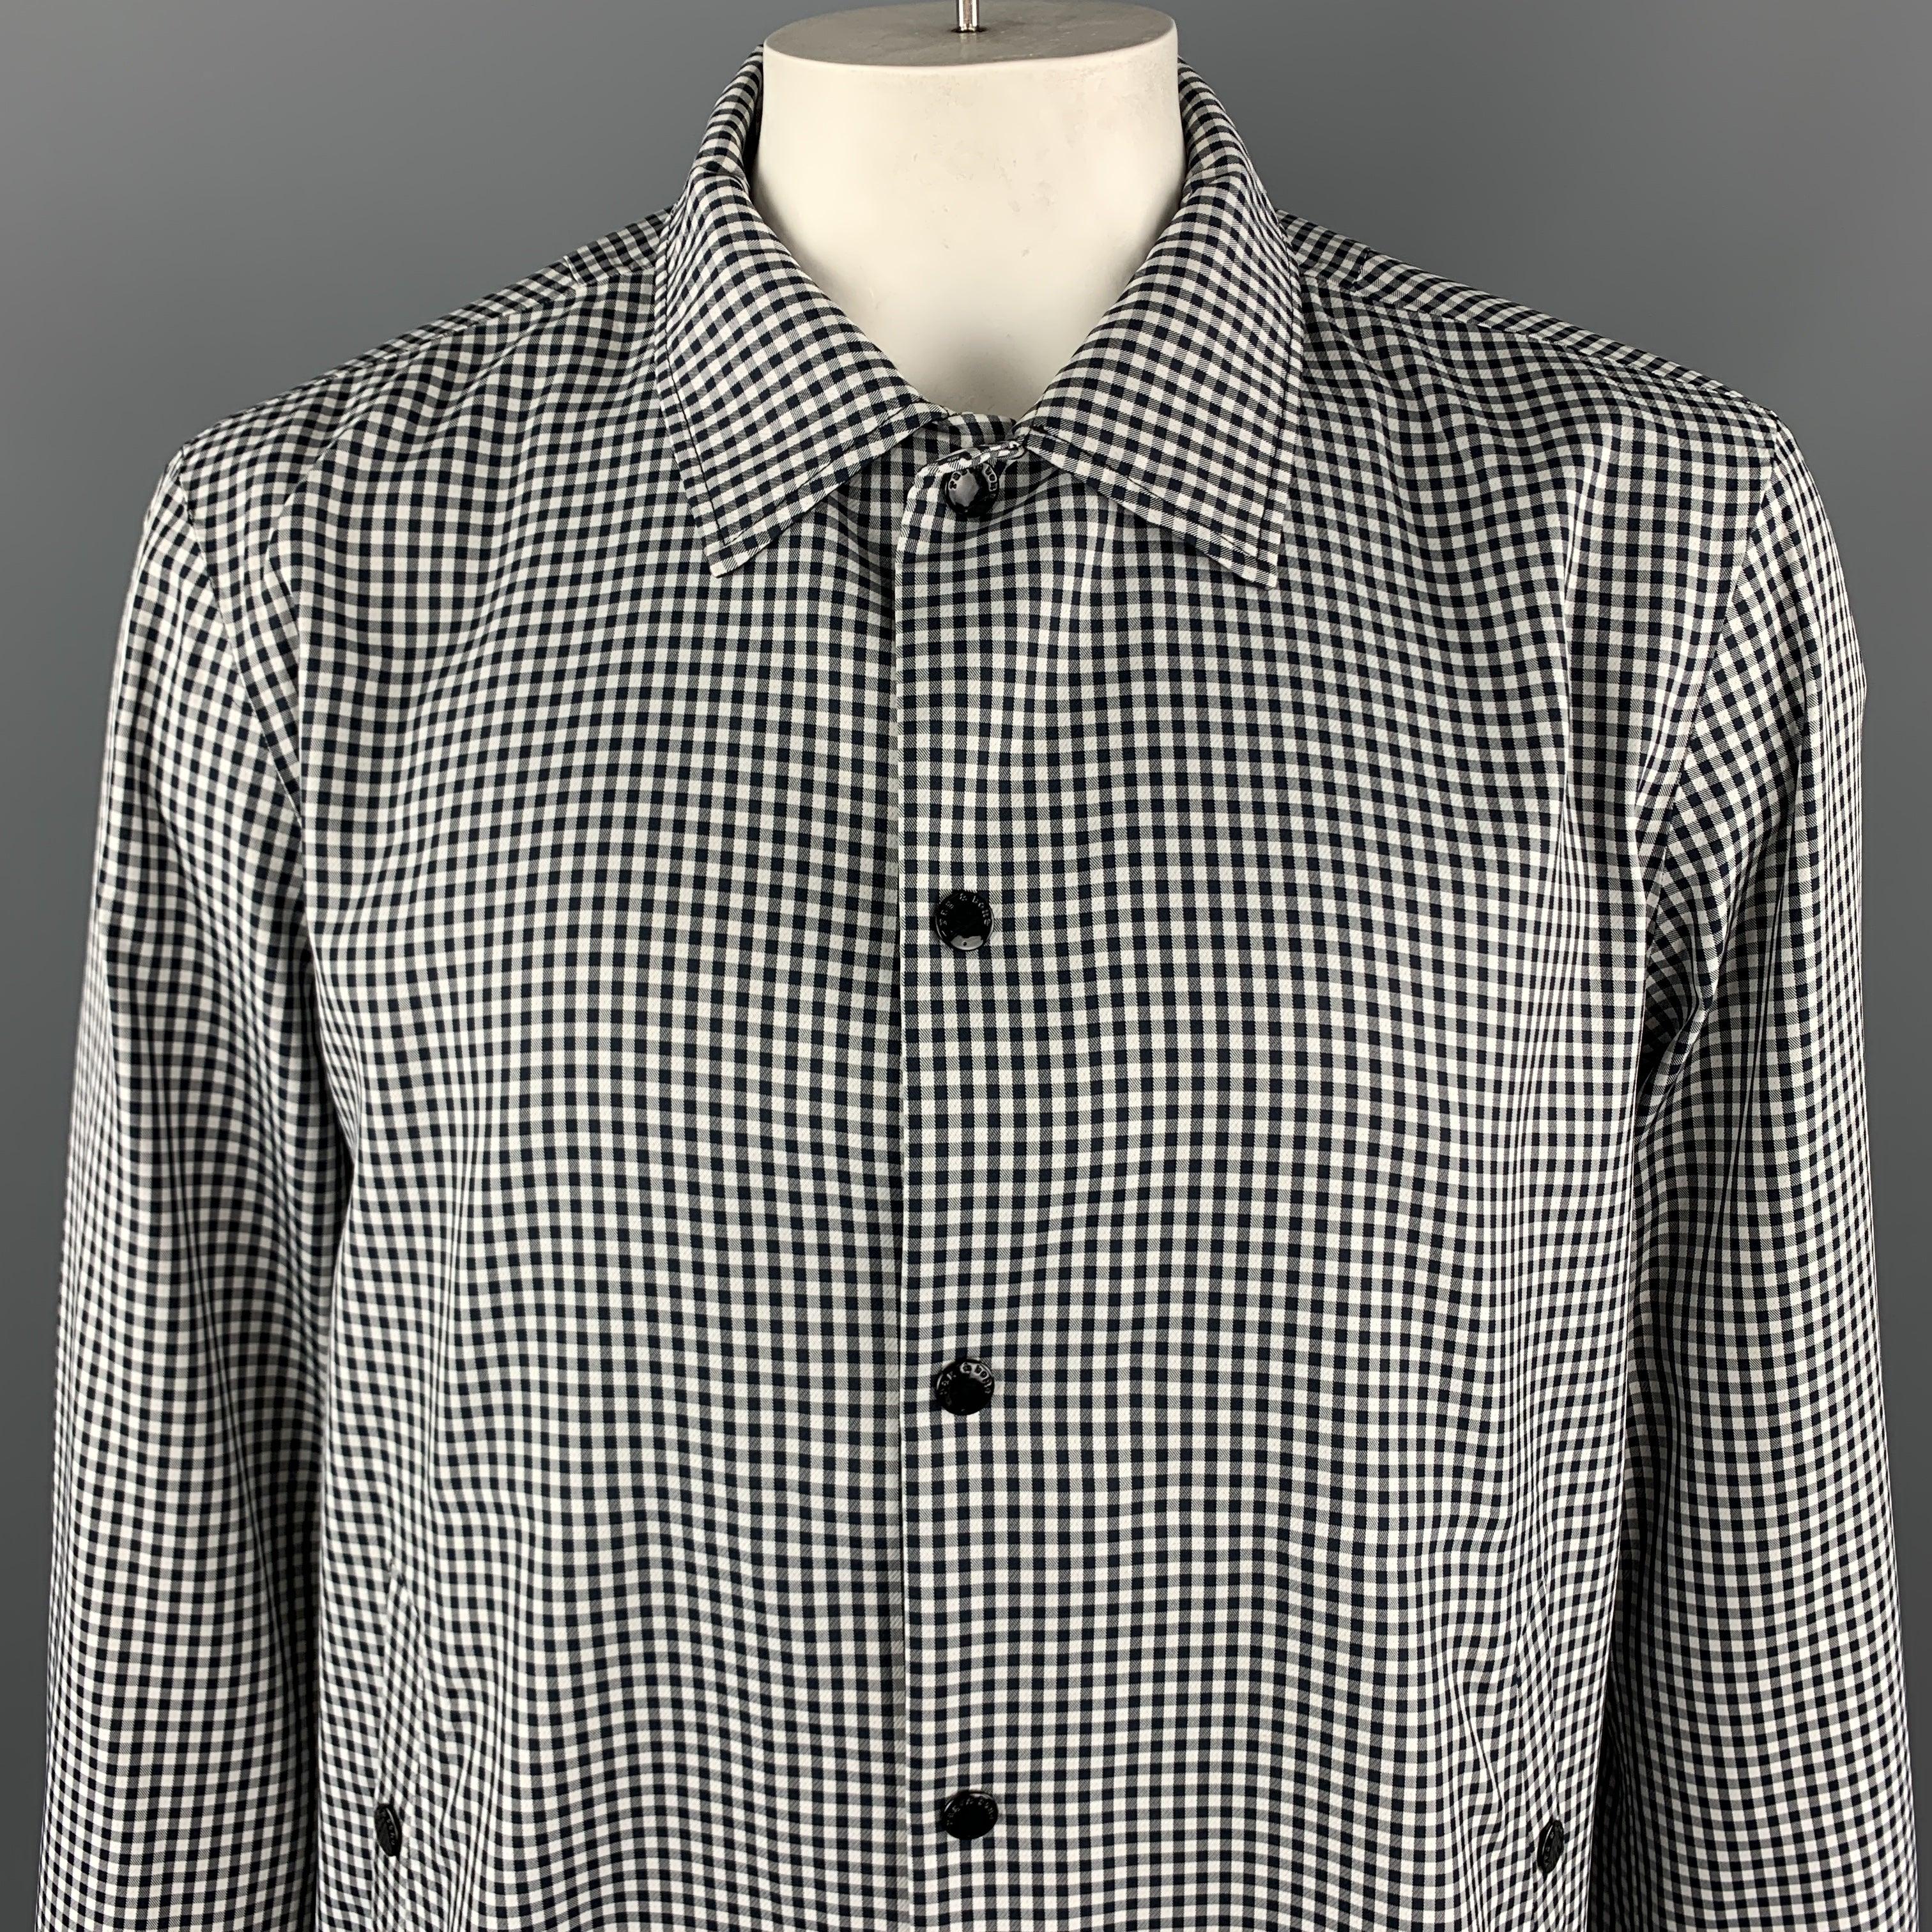 RAG & BONE
Jacket comes in a black and white checkered polyester material, with snaps at closure and pockets, a drawstring at hem, unlined.
Excellent Pre-Owned Condition. 

Marked:   XL 

Measurements: 
 
Shoulder: 18.5 inches 
Chest: 52 inches